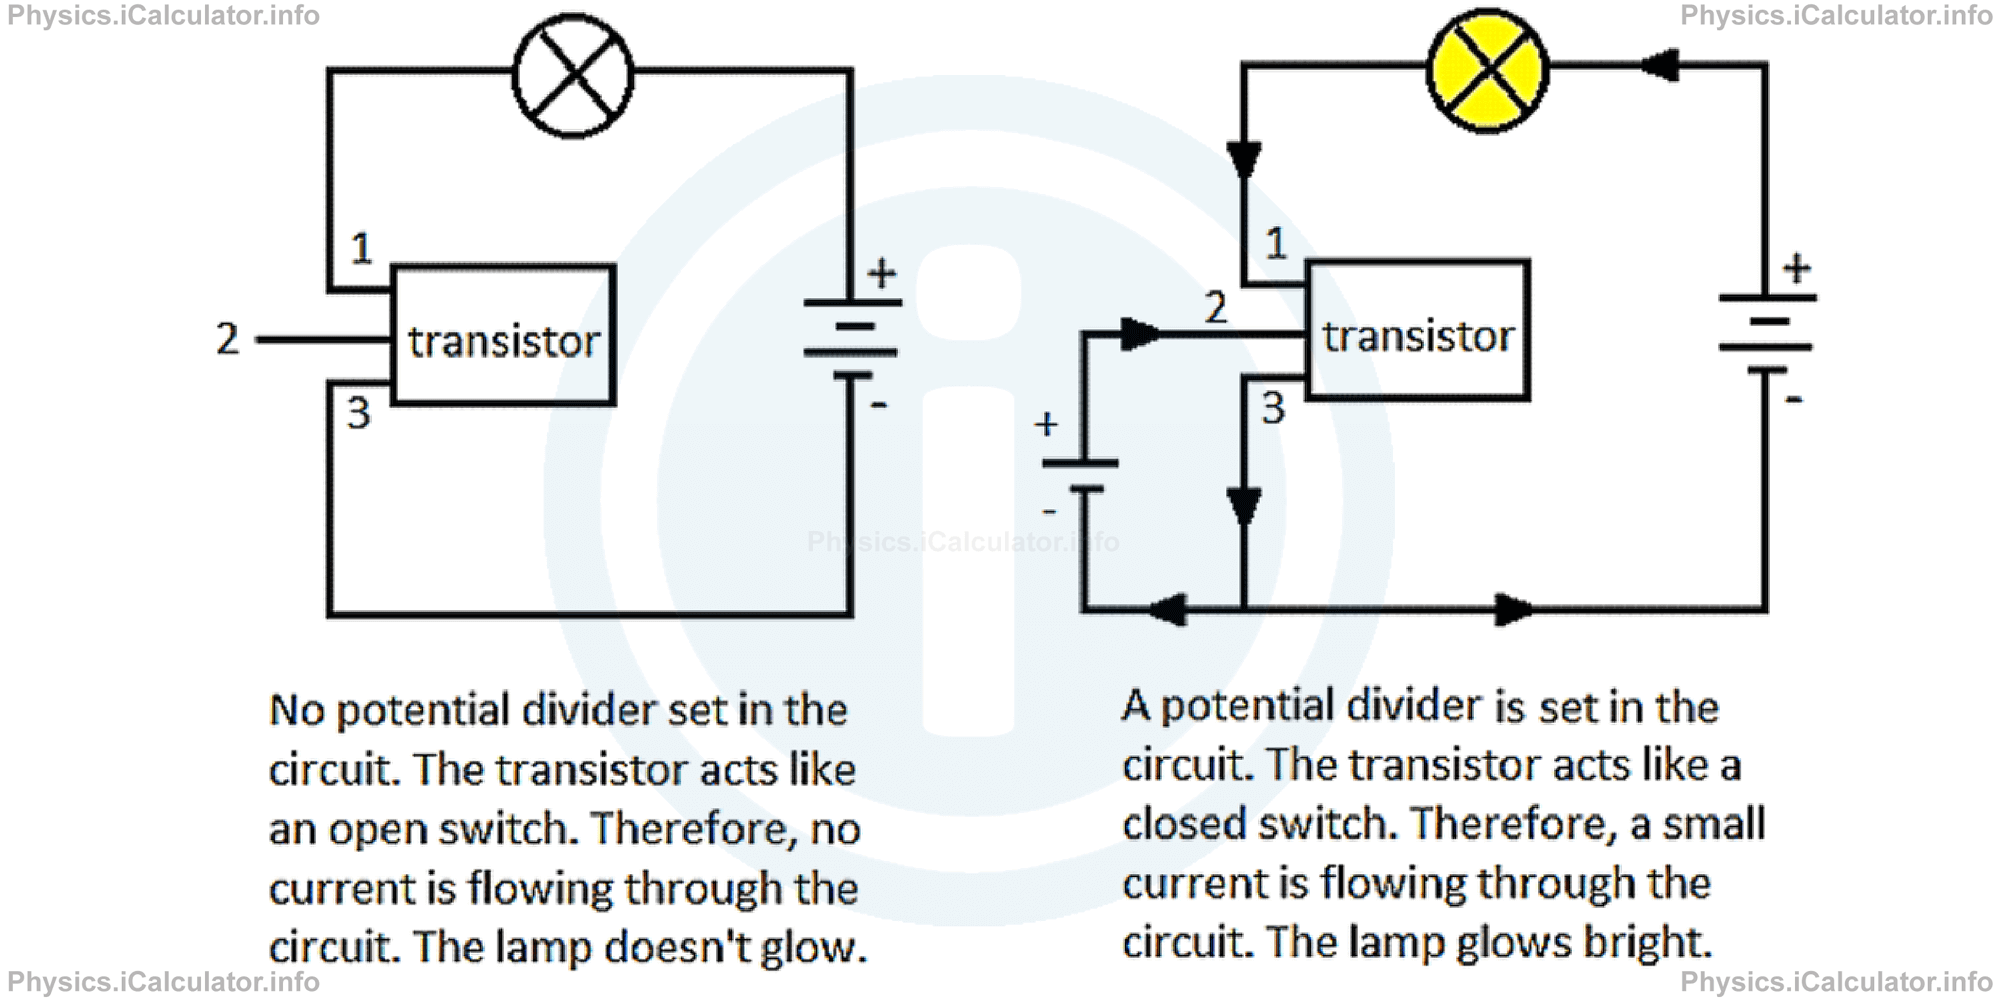 Physics Tutorials: This image provides visual information for the physics tutorial Electronic Components and Switching 